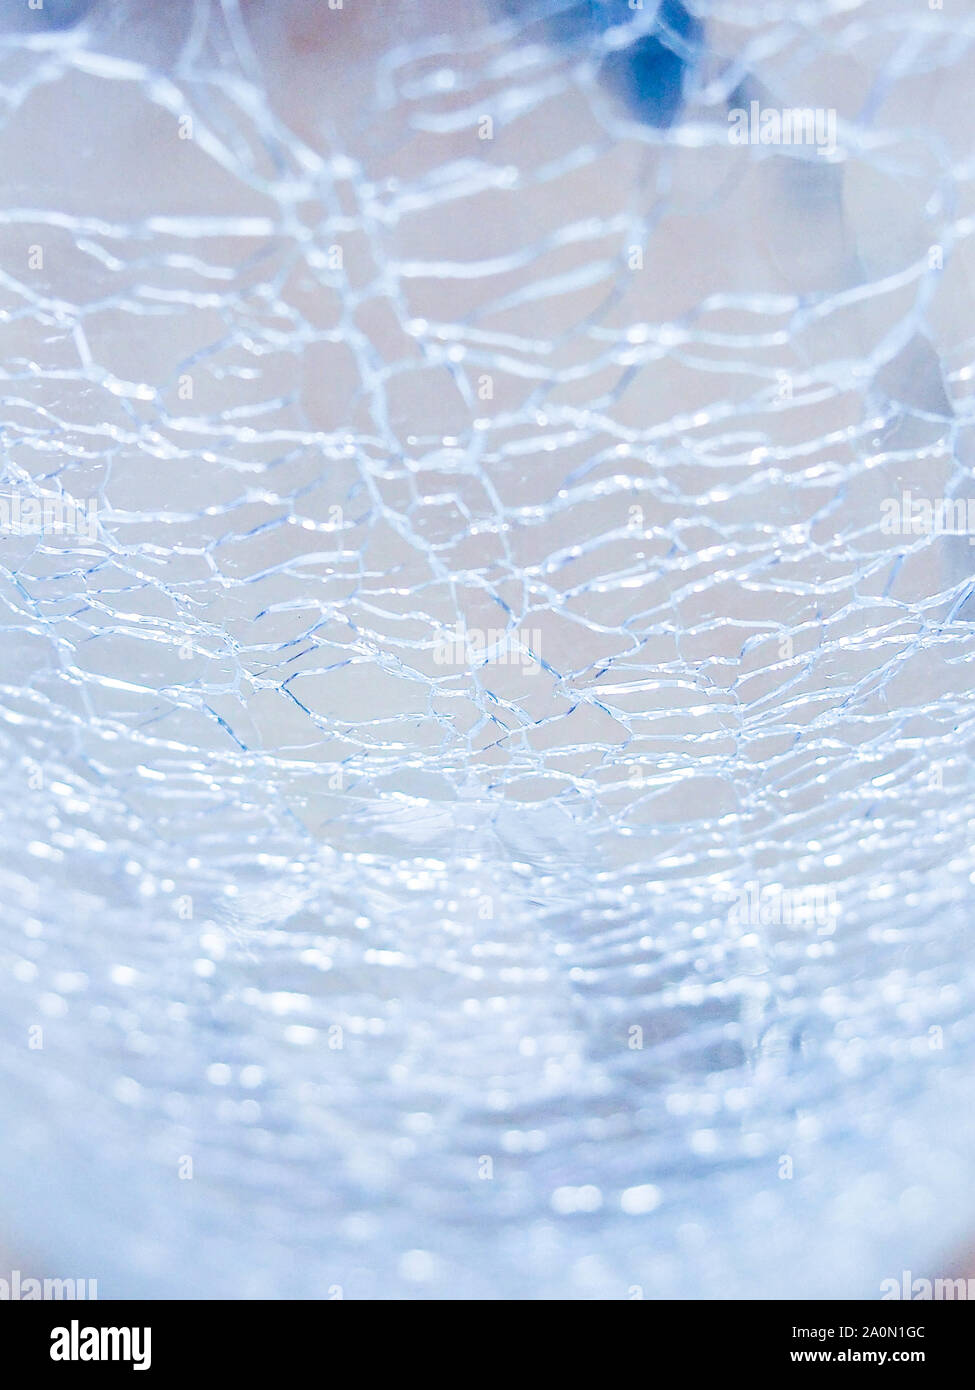 Abstract - Cracked Glass, texture small cracks on the glass Stock Photo